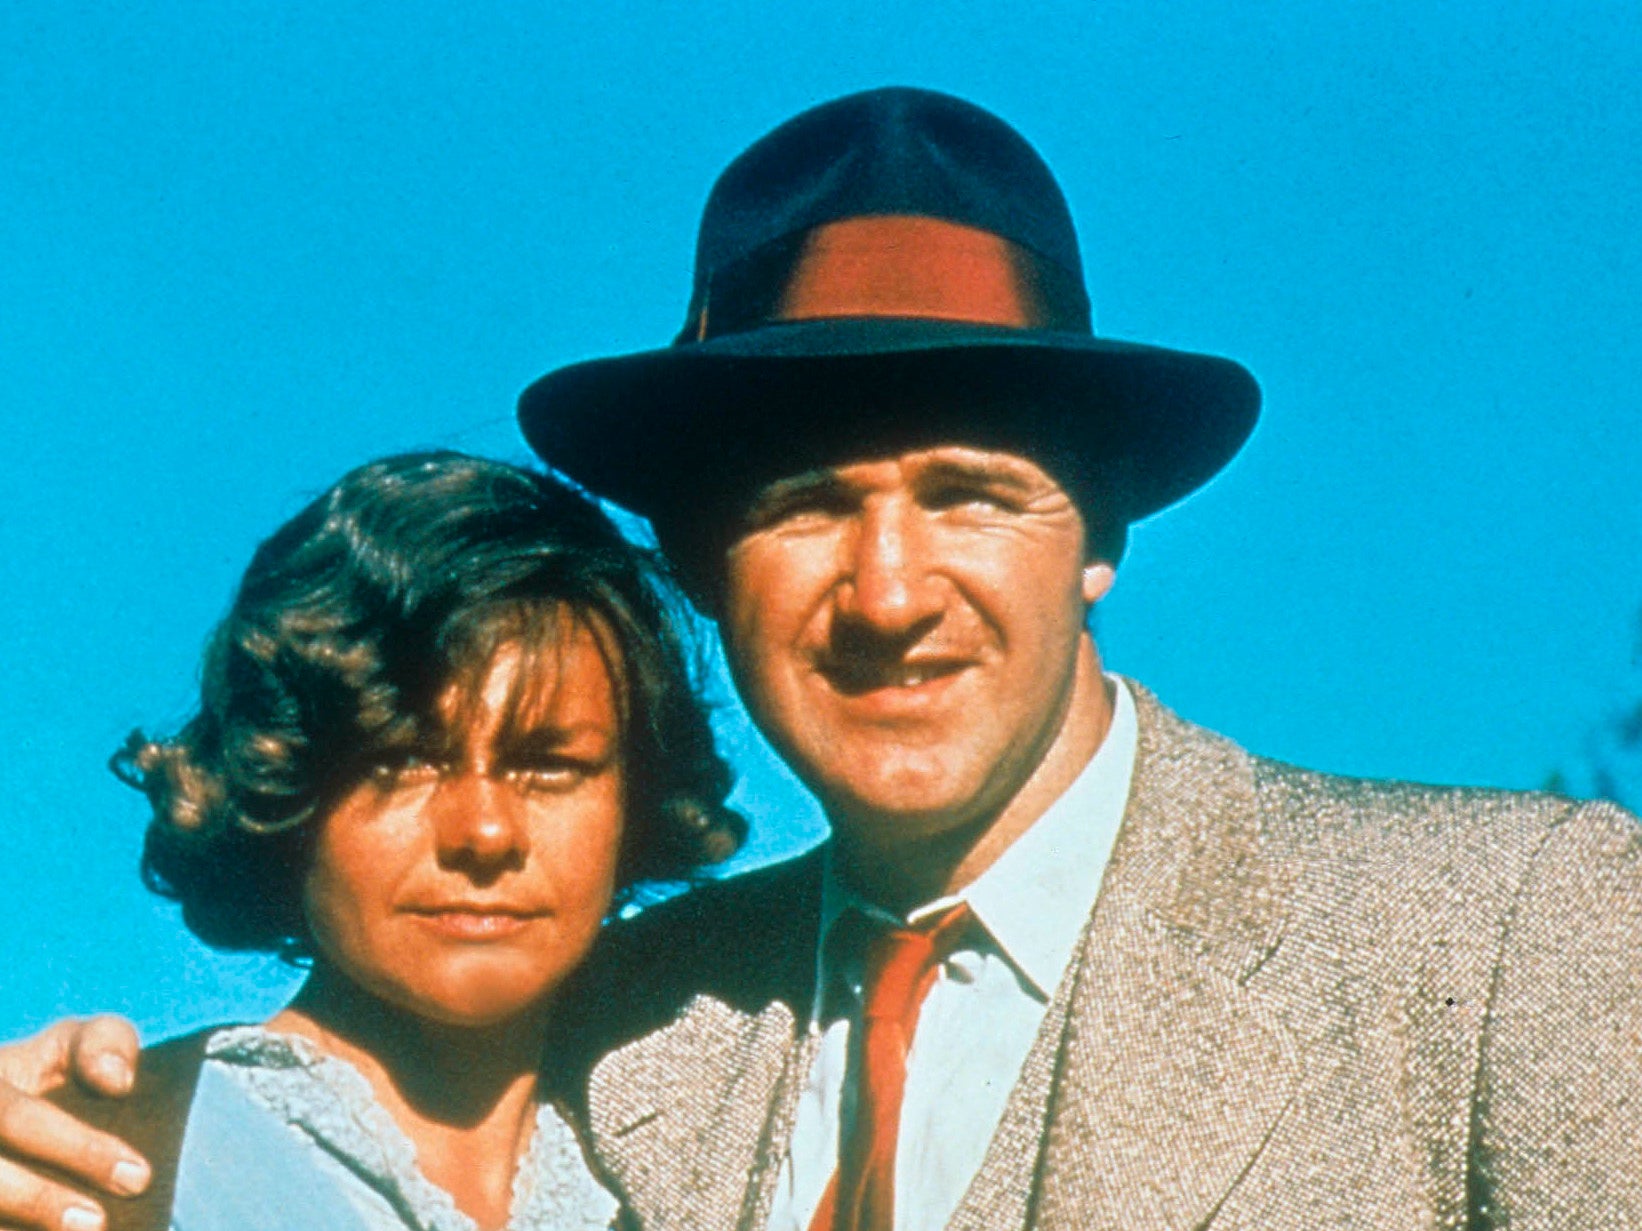 Estelle Parsons and Gene Hackman in 1967 crime film ‘Bonnie and Clyde’